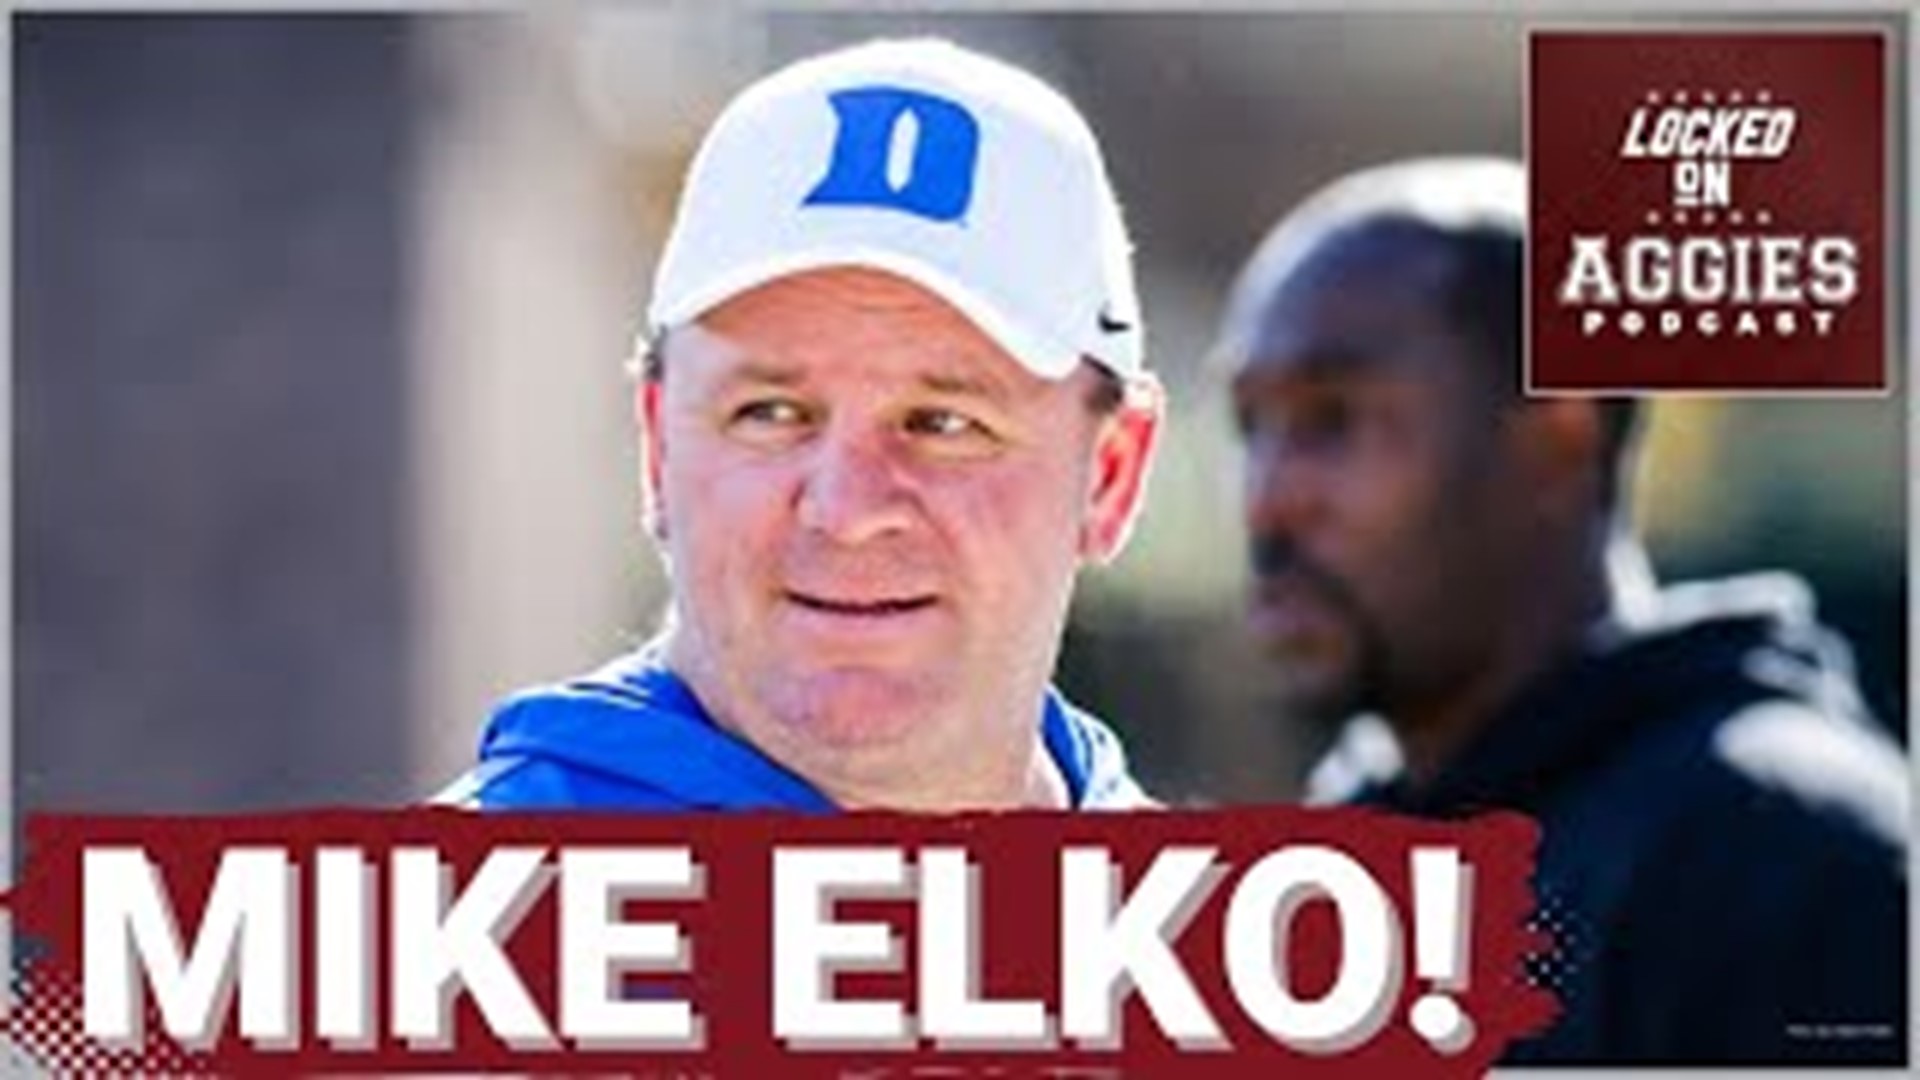 On today's episode of Locked On Aggies, host Andrew Stefaniak talks about how Texas A&M is planning to hire Mike Elko as their next head football coach after Jimbo.